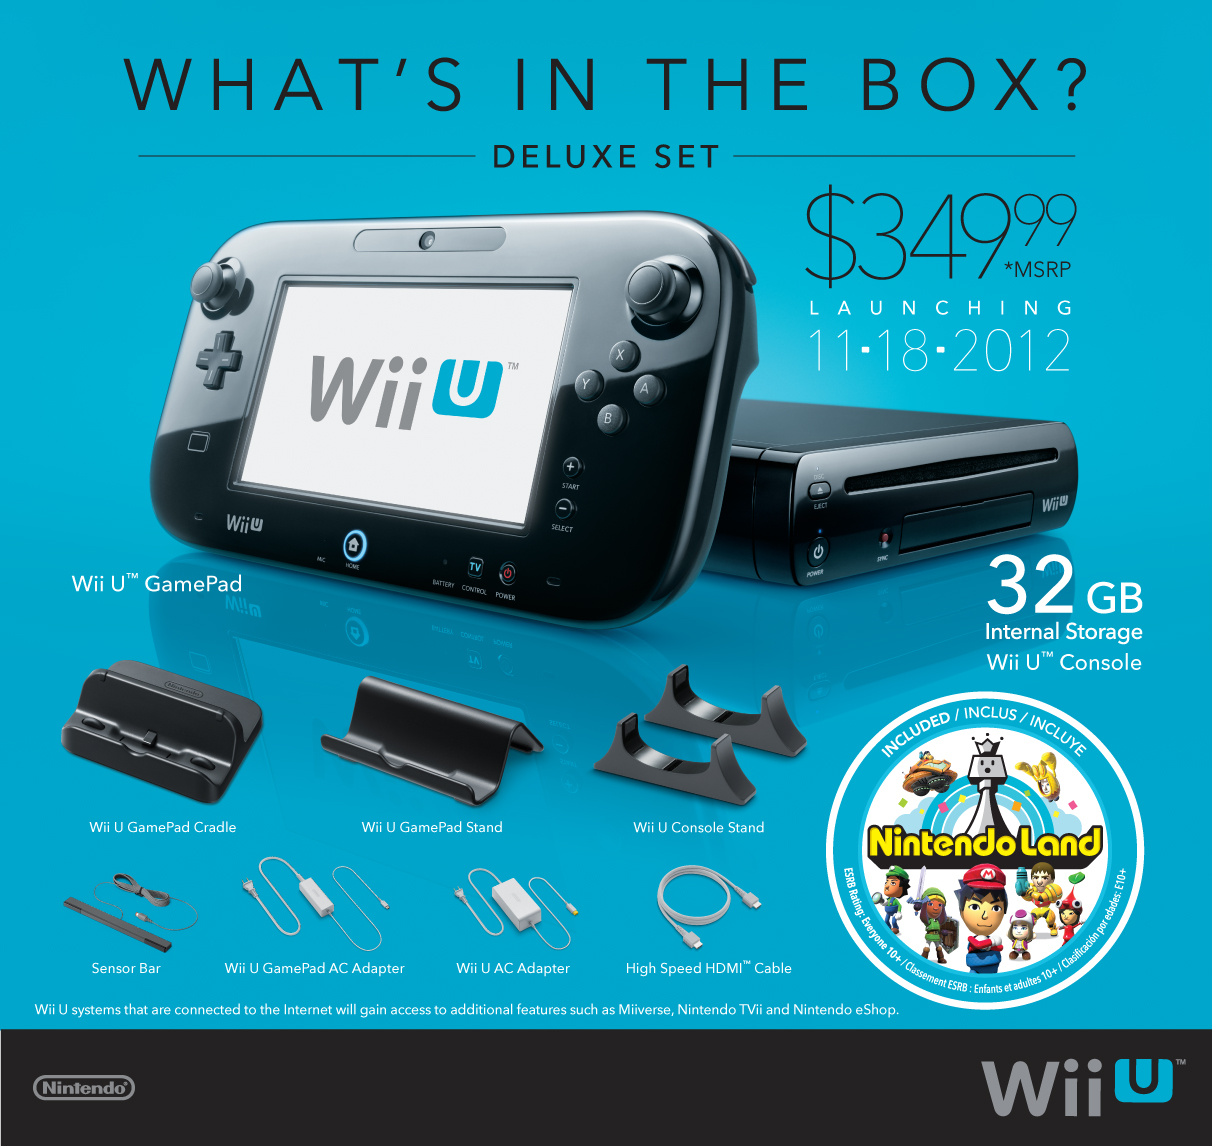 Nintendo Says Wii U Deluxe Set Is Selling Out Incredibly Quickly - My  Nintendo News